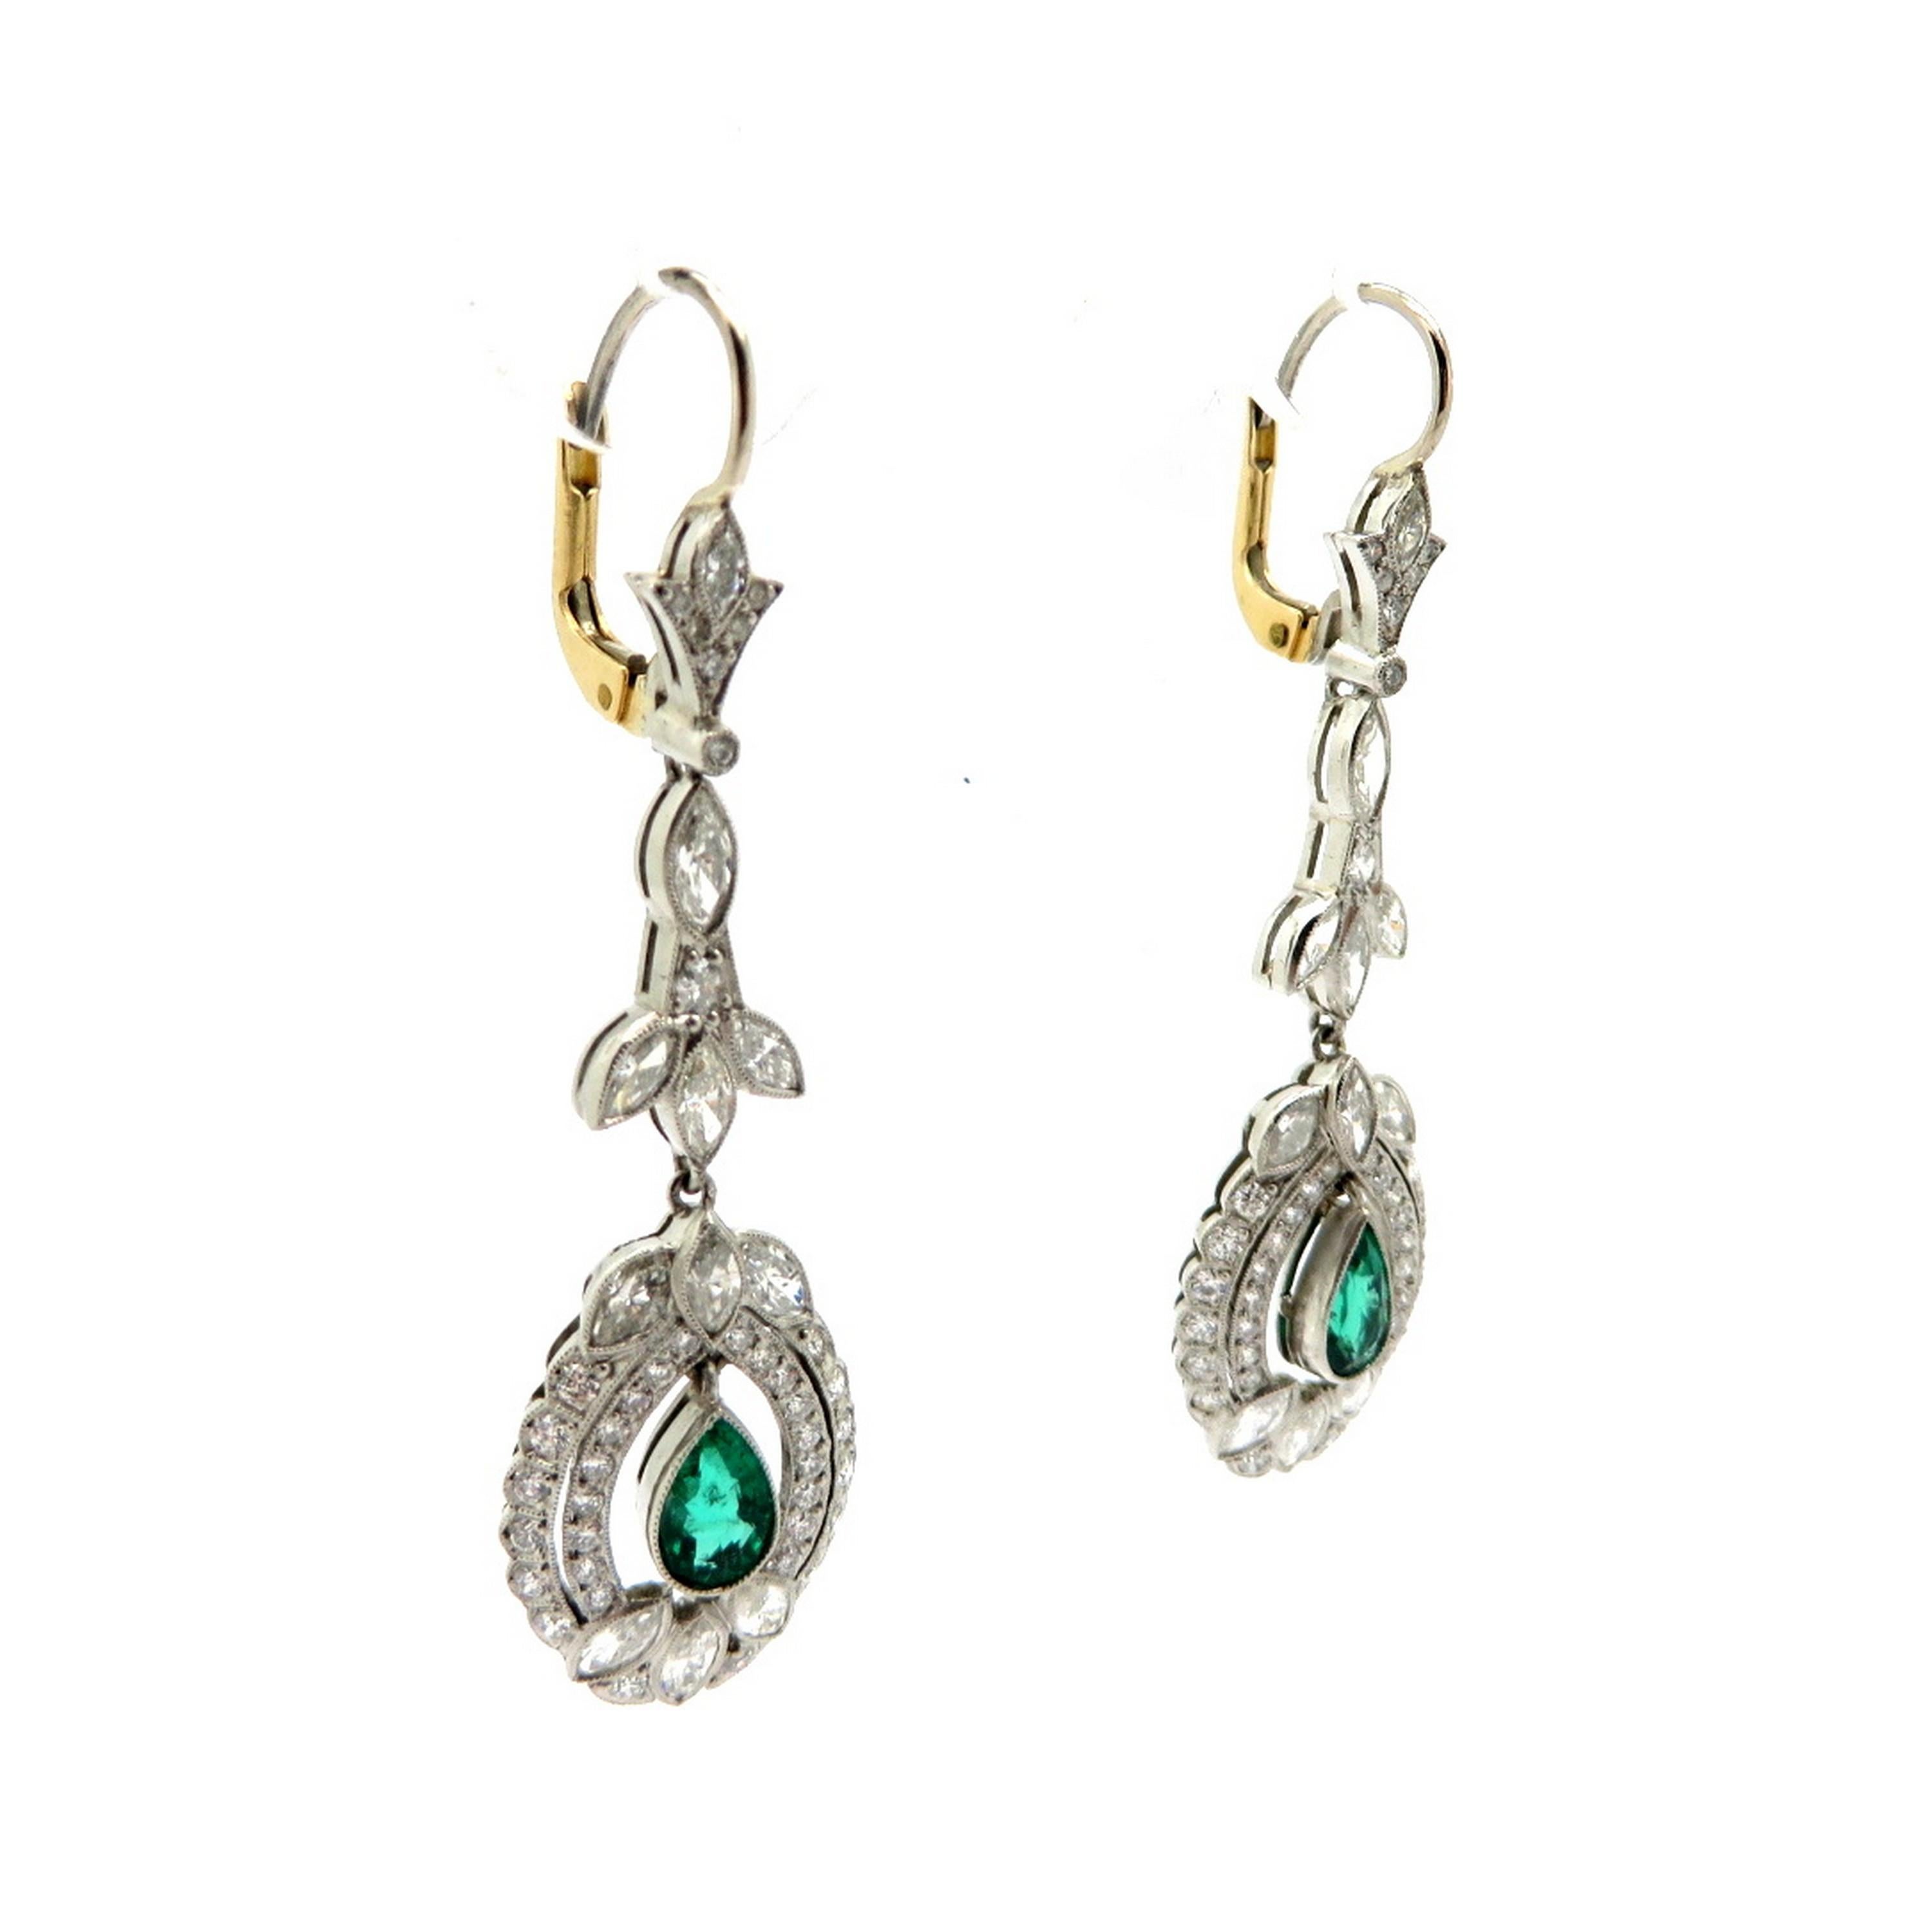 Estate platinum and 14K yellow gold antique Old European cut emerald and diamond dangle earrings. Showcasing two pear shaped fine quality natural emeralds, milgrain bezel set, weighing a total of approximately 1.15 carats. Accented with numerous Old